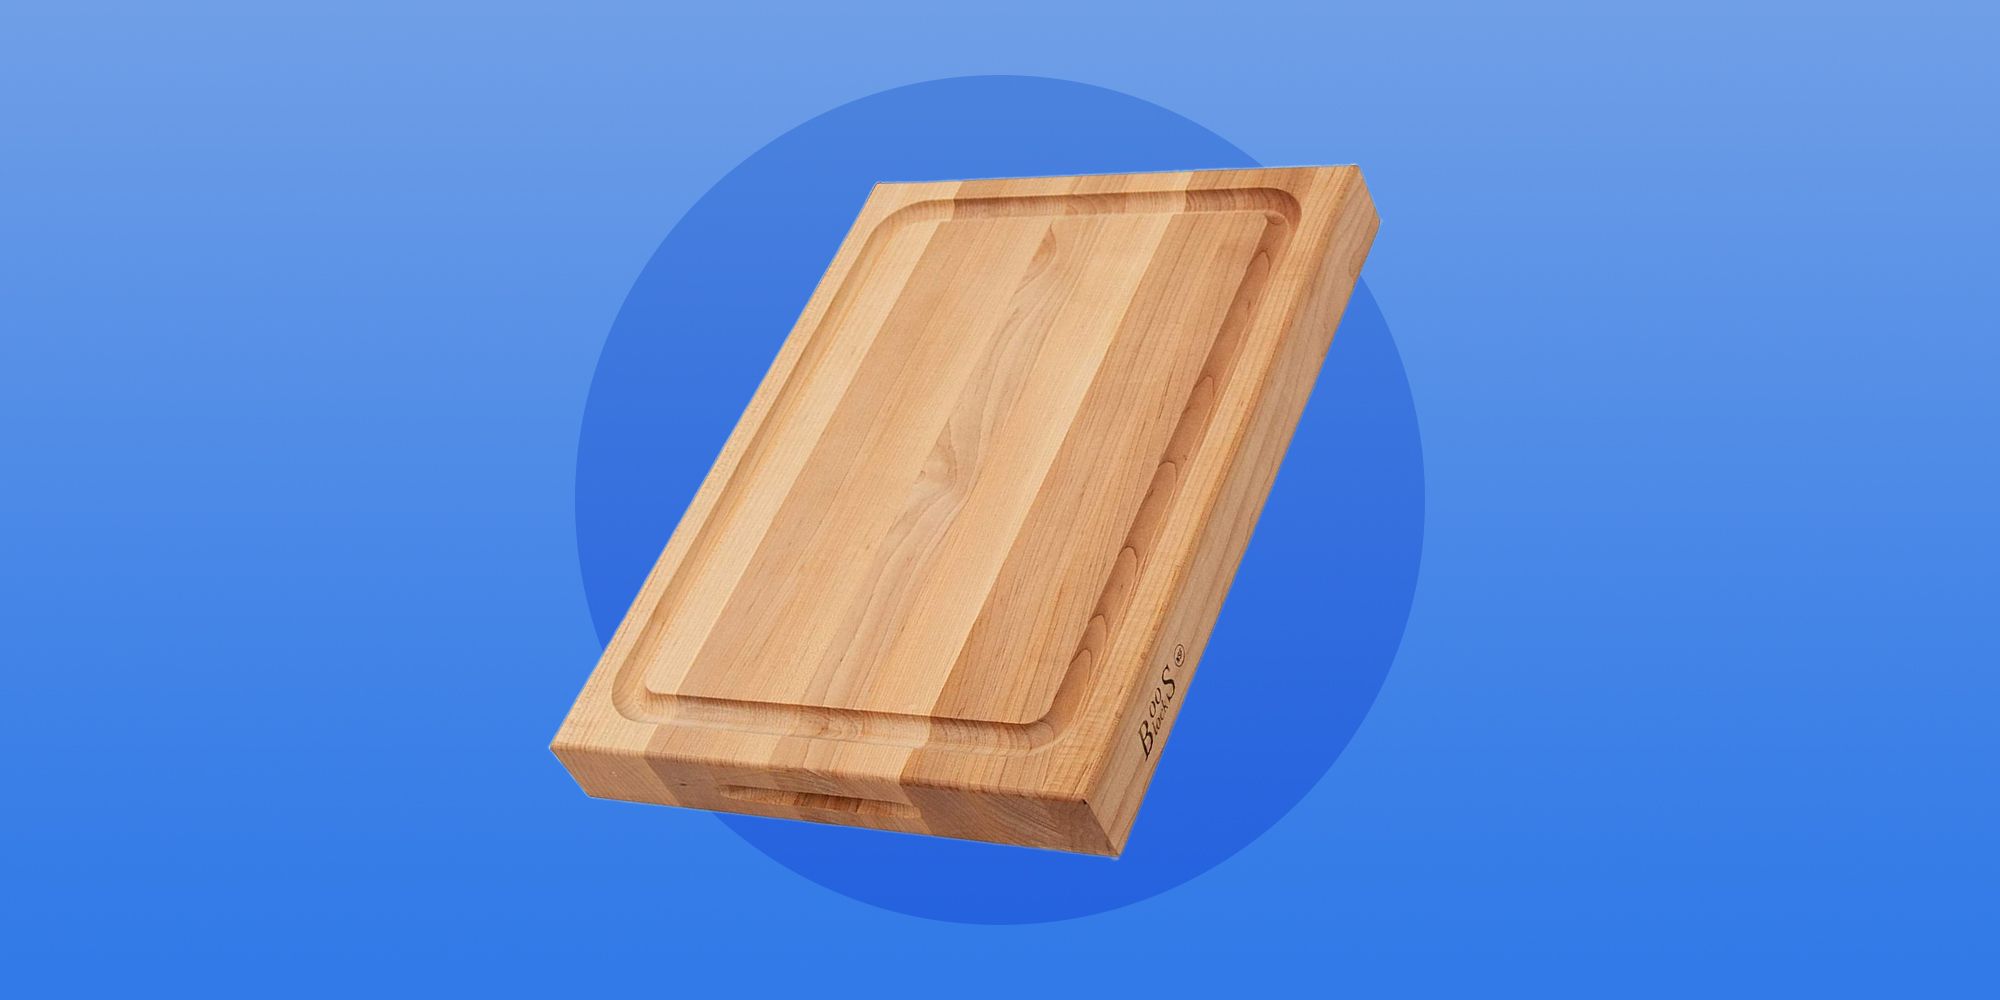 New 2 Toned Reversible TRULUV Bamboo Cutting Board 12"x8” 